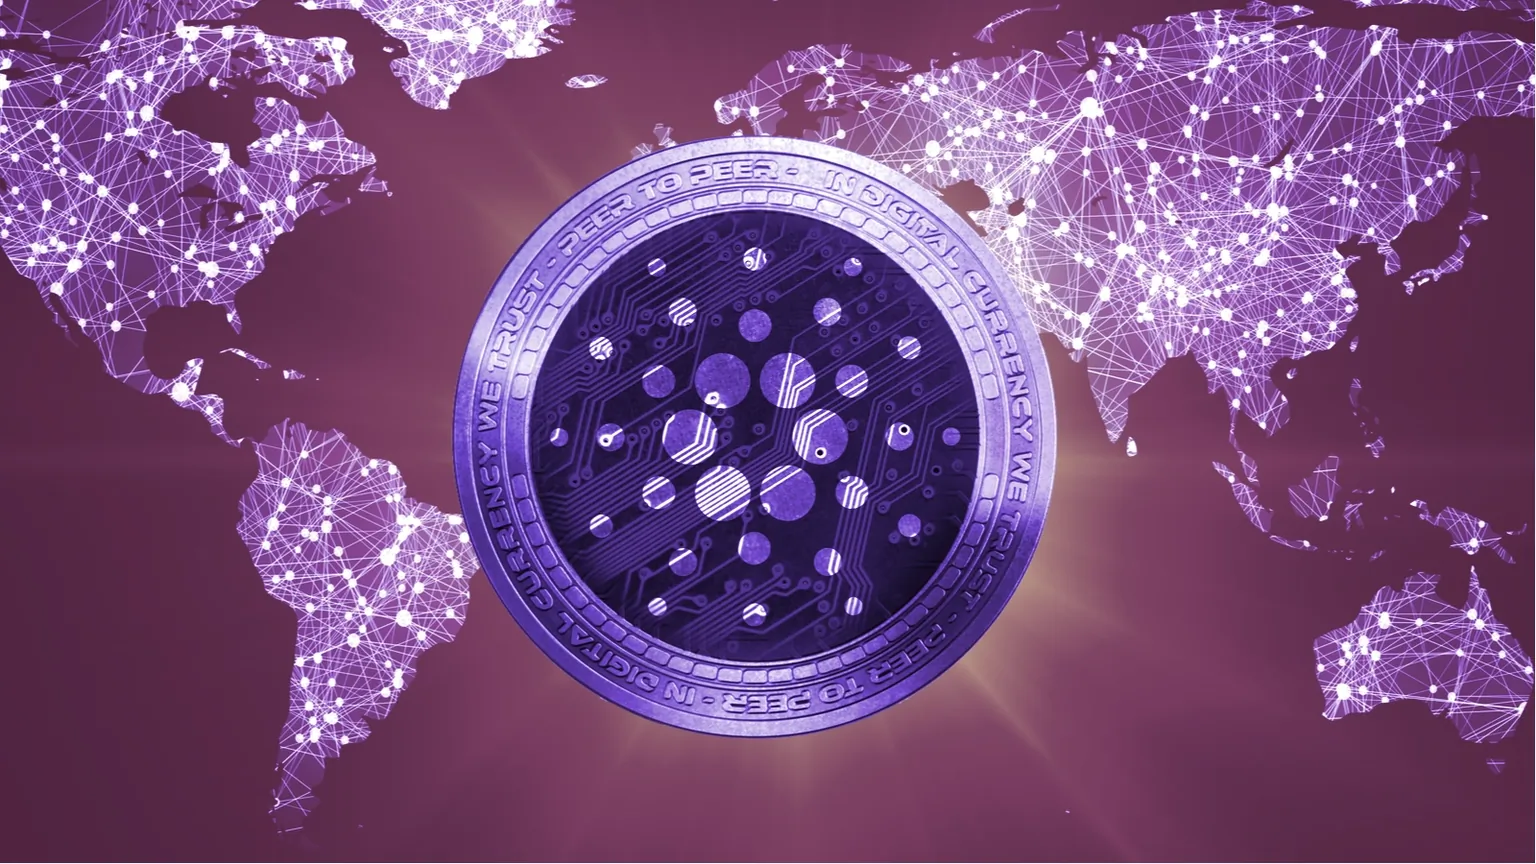 Cardano's price is up in recent days (Image: Shutterstock)